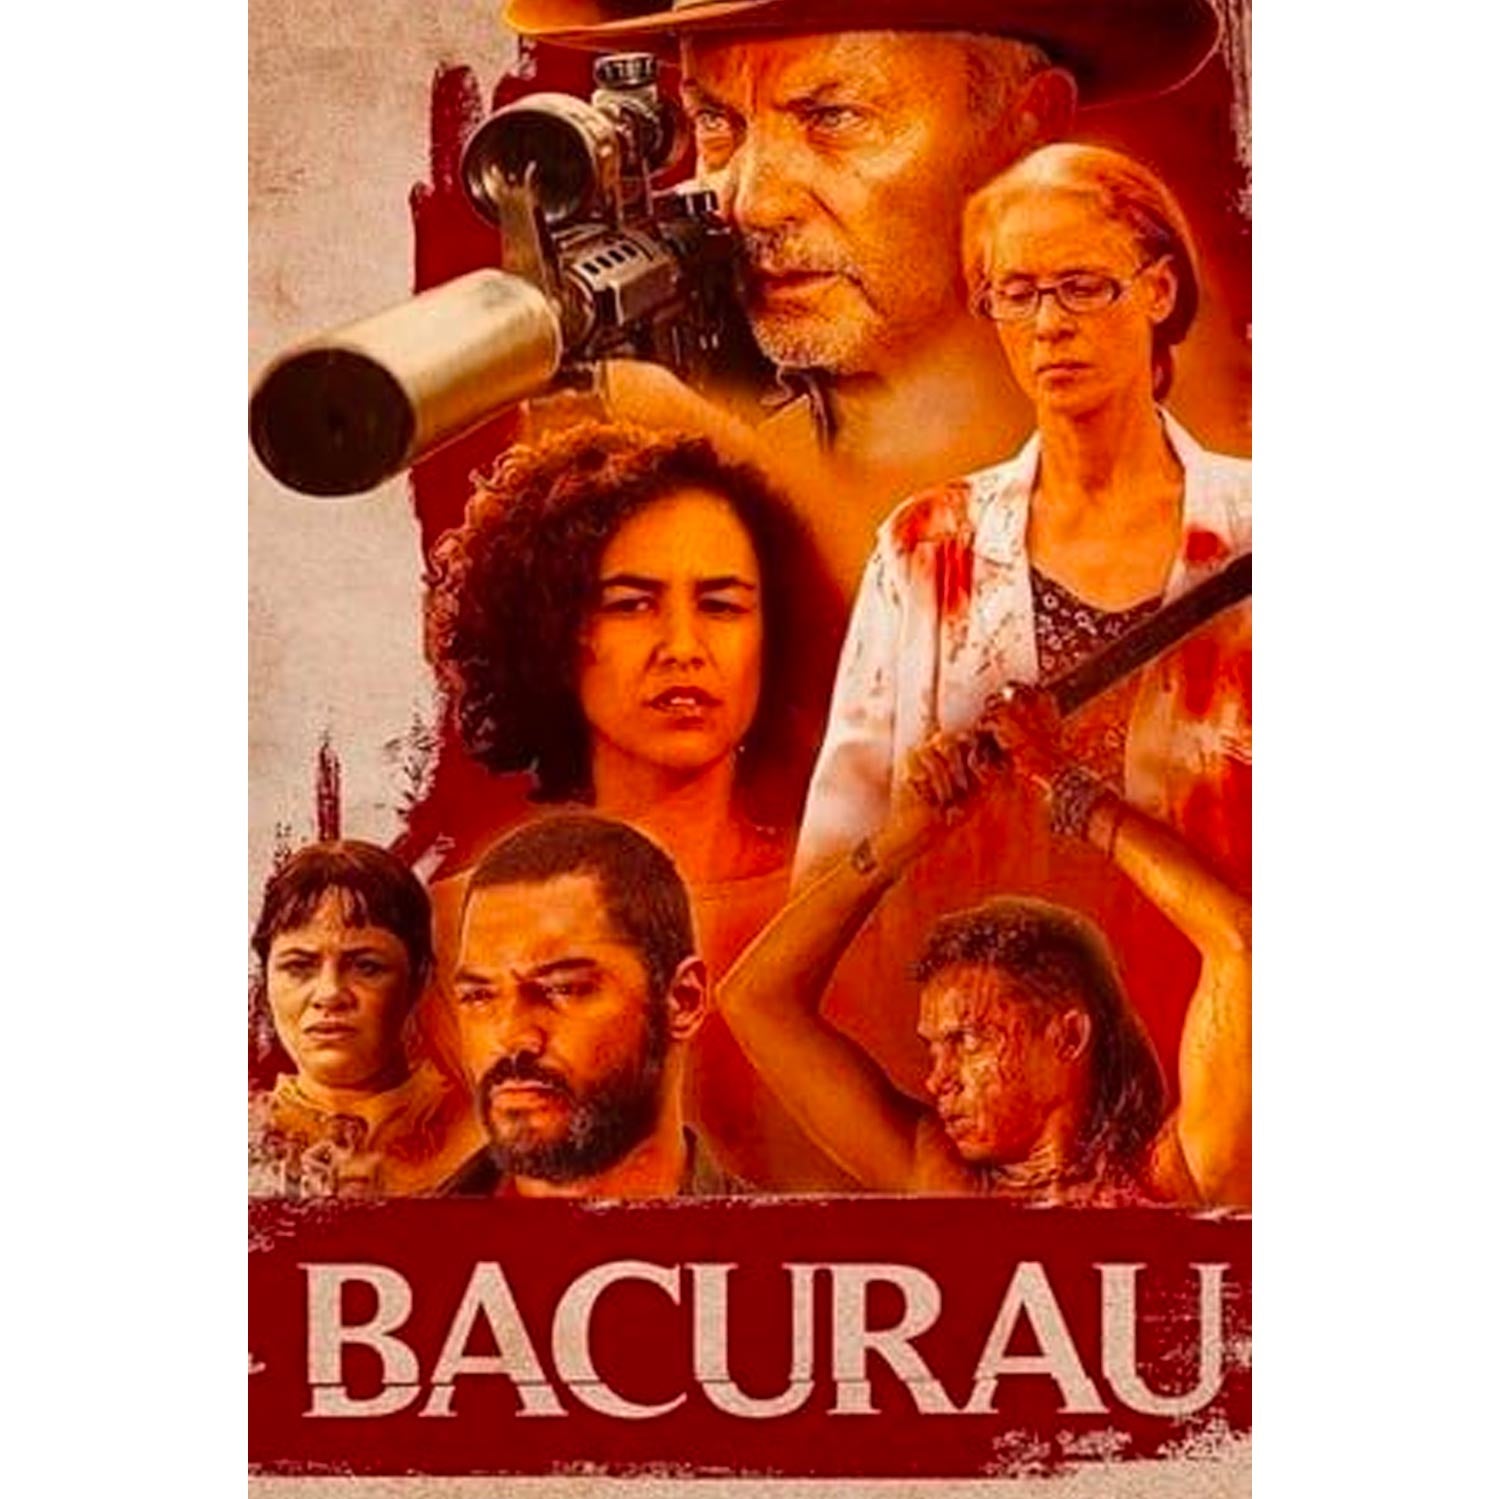 The poster for Bacurau.